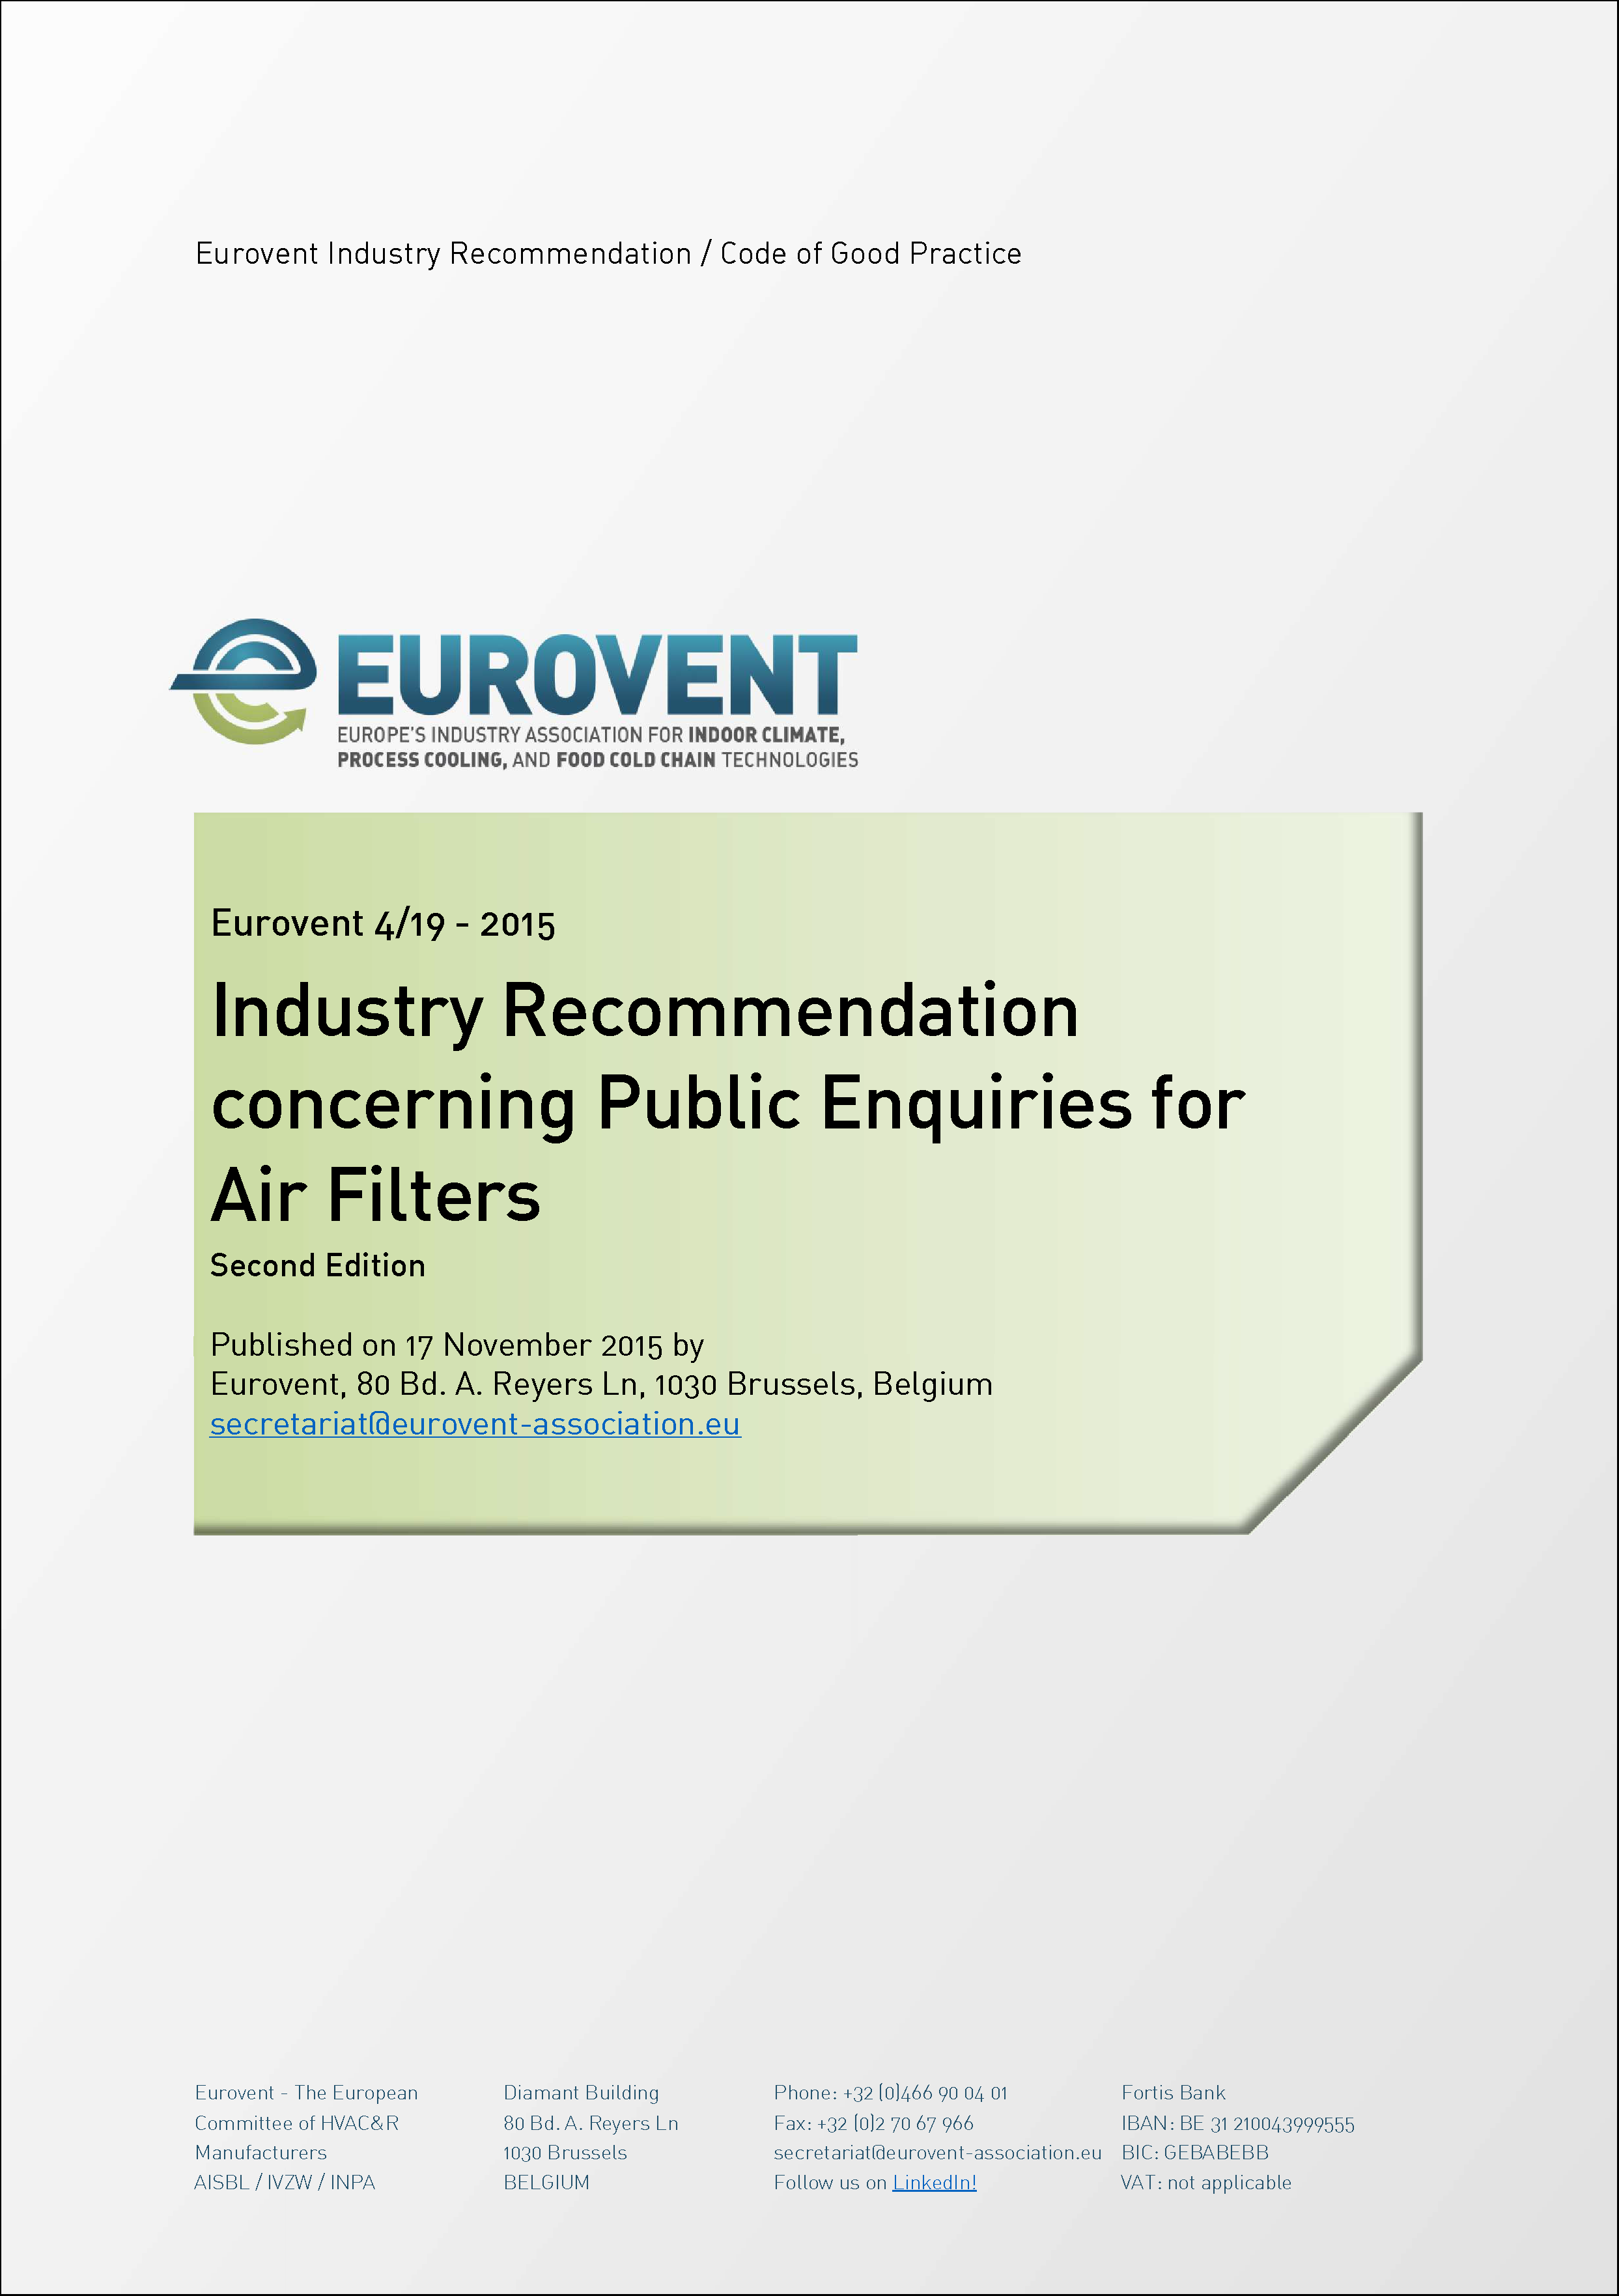 2015 - Updated Industry Recommendation concerning Public Enquiries for Air Filters